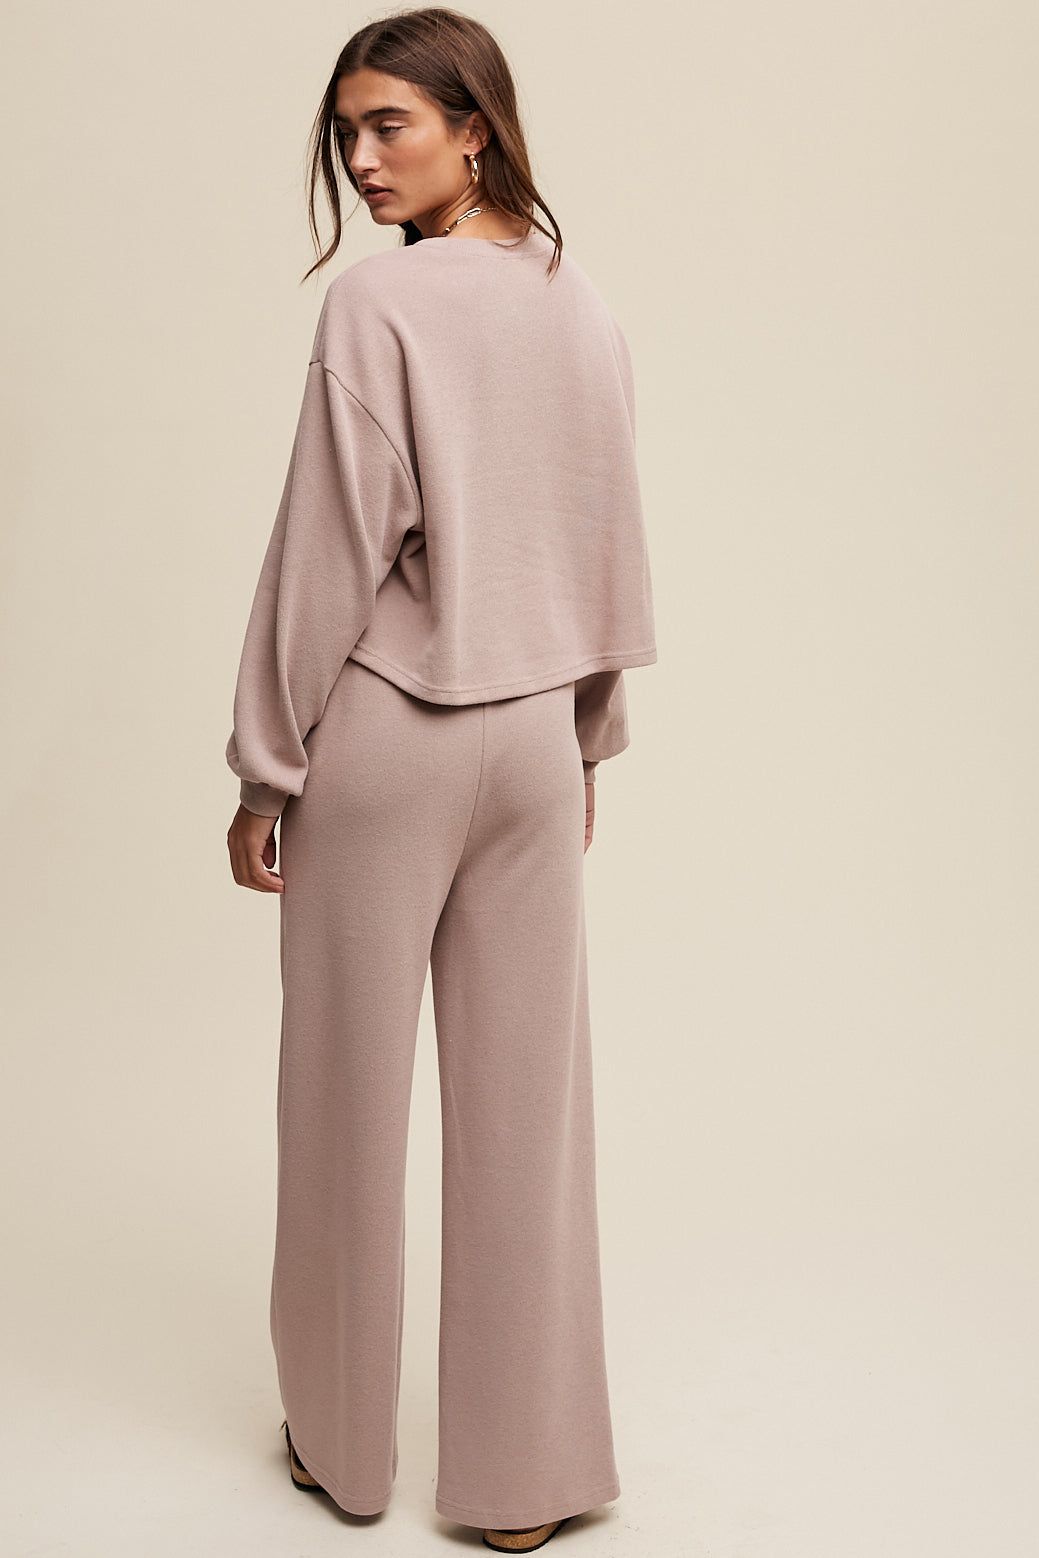 Listicle Knit Sweat Top and Pants Athleisure Lounge Sets- MAUVE